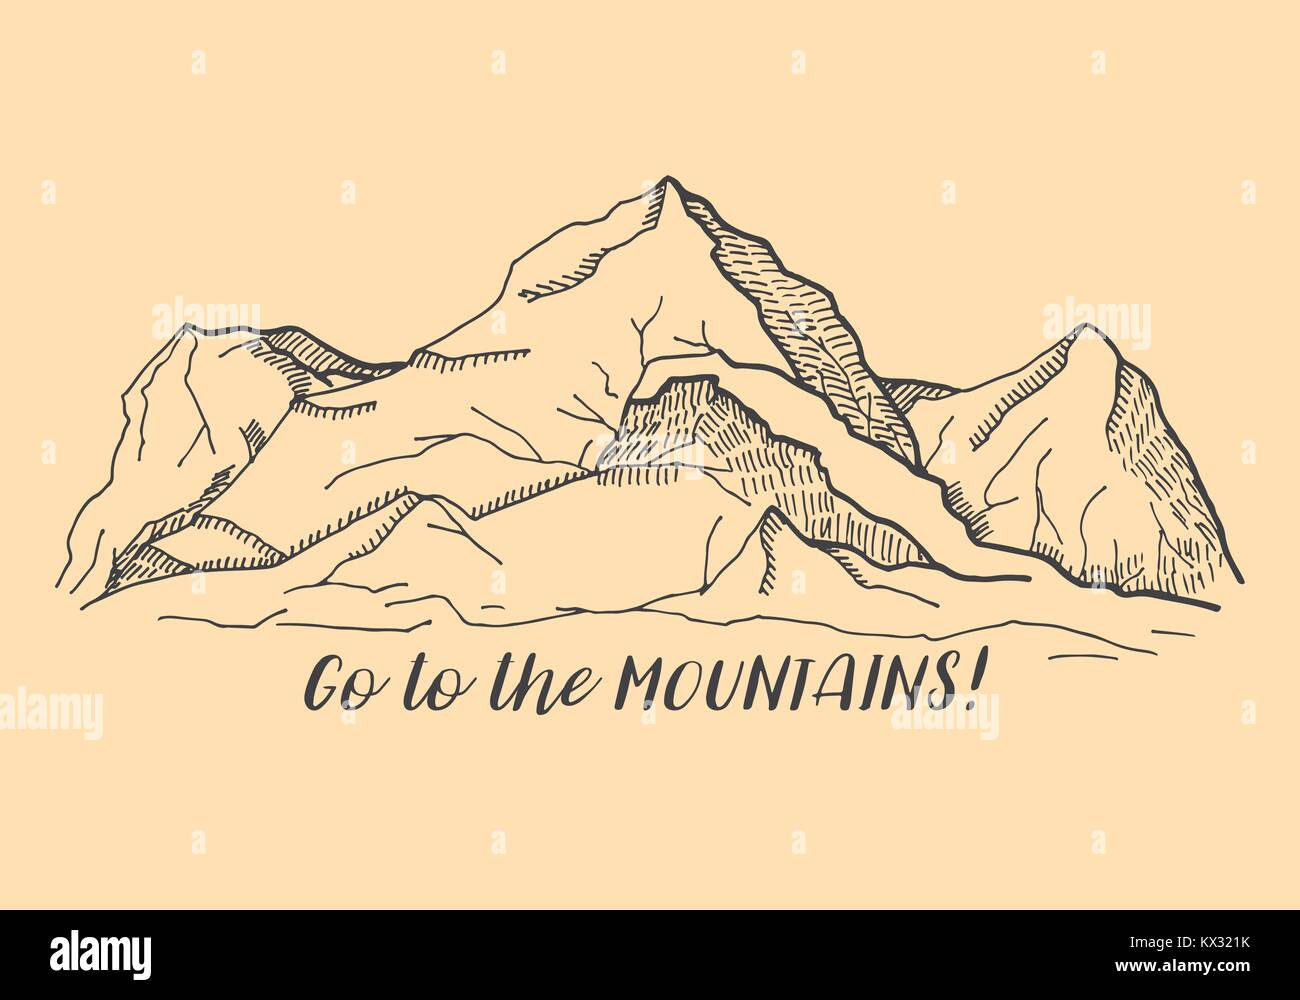 Mountains. The inscription: Go to the Mountains. Vector illustration of a sketch style. Stock Vector